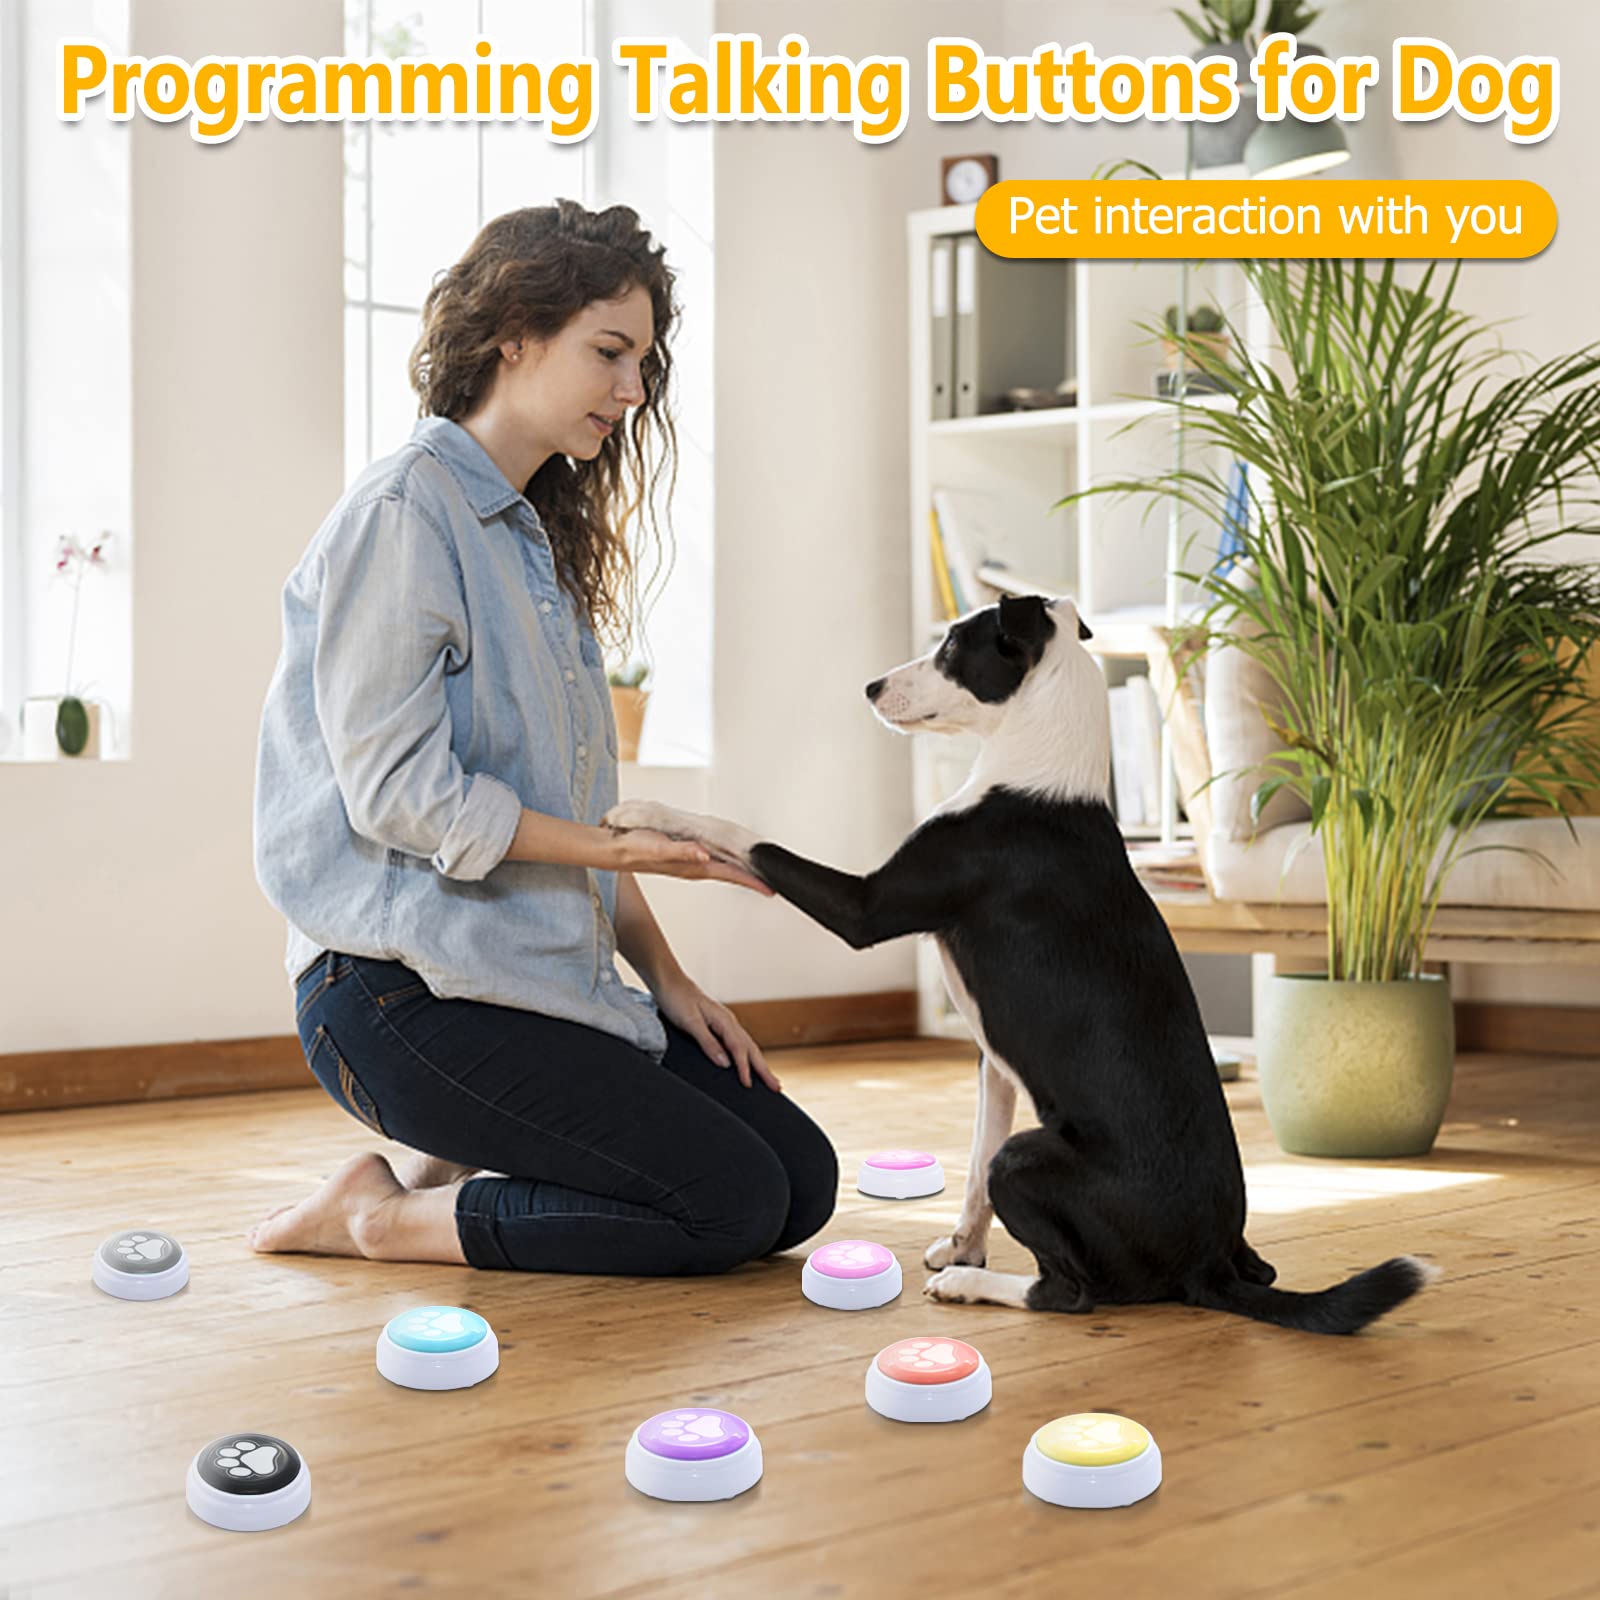 Daytech Dog Buttons for Communication - Recordable Talking Buttons for Dogs to Press to Communication,30 Seconds Voice Dog Training Speaking Buttons Pack of 8 (Battery Inclued)